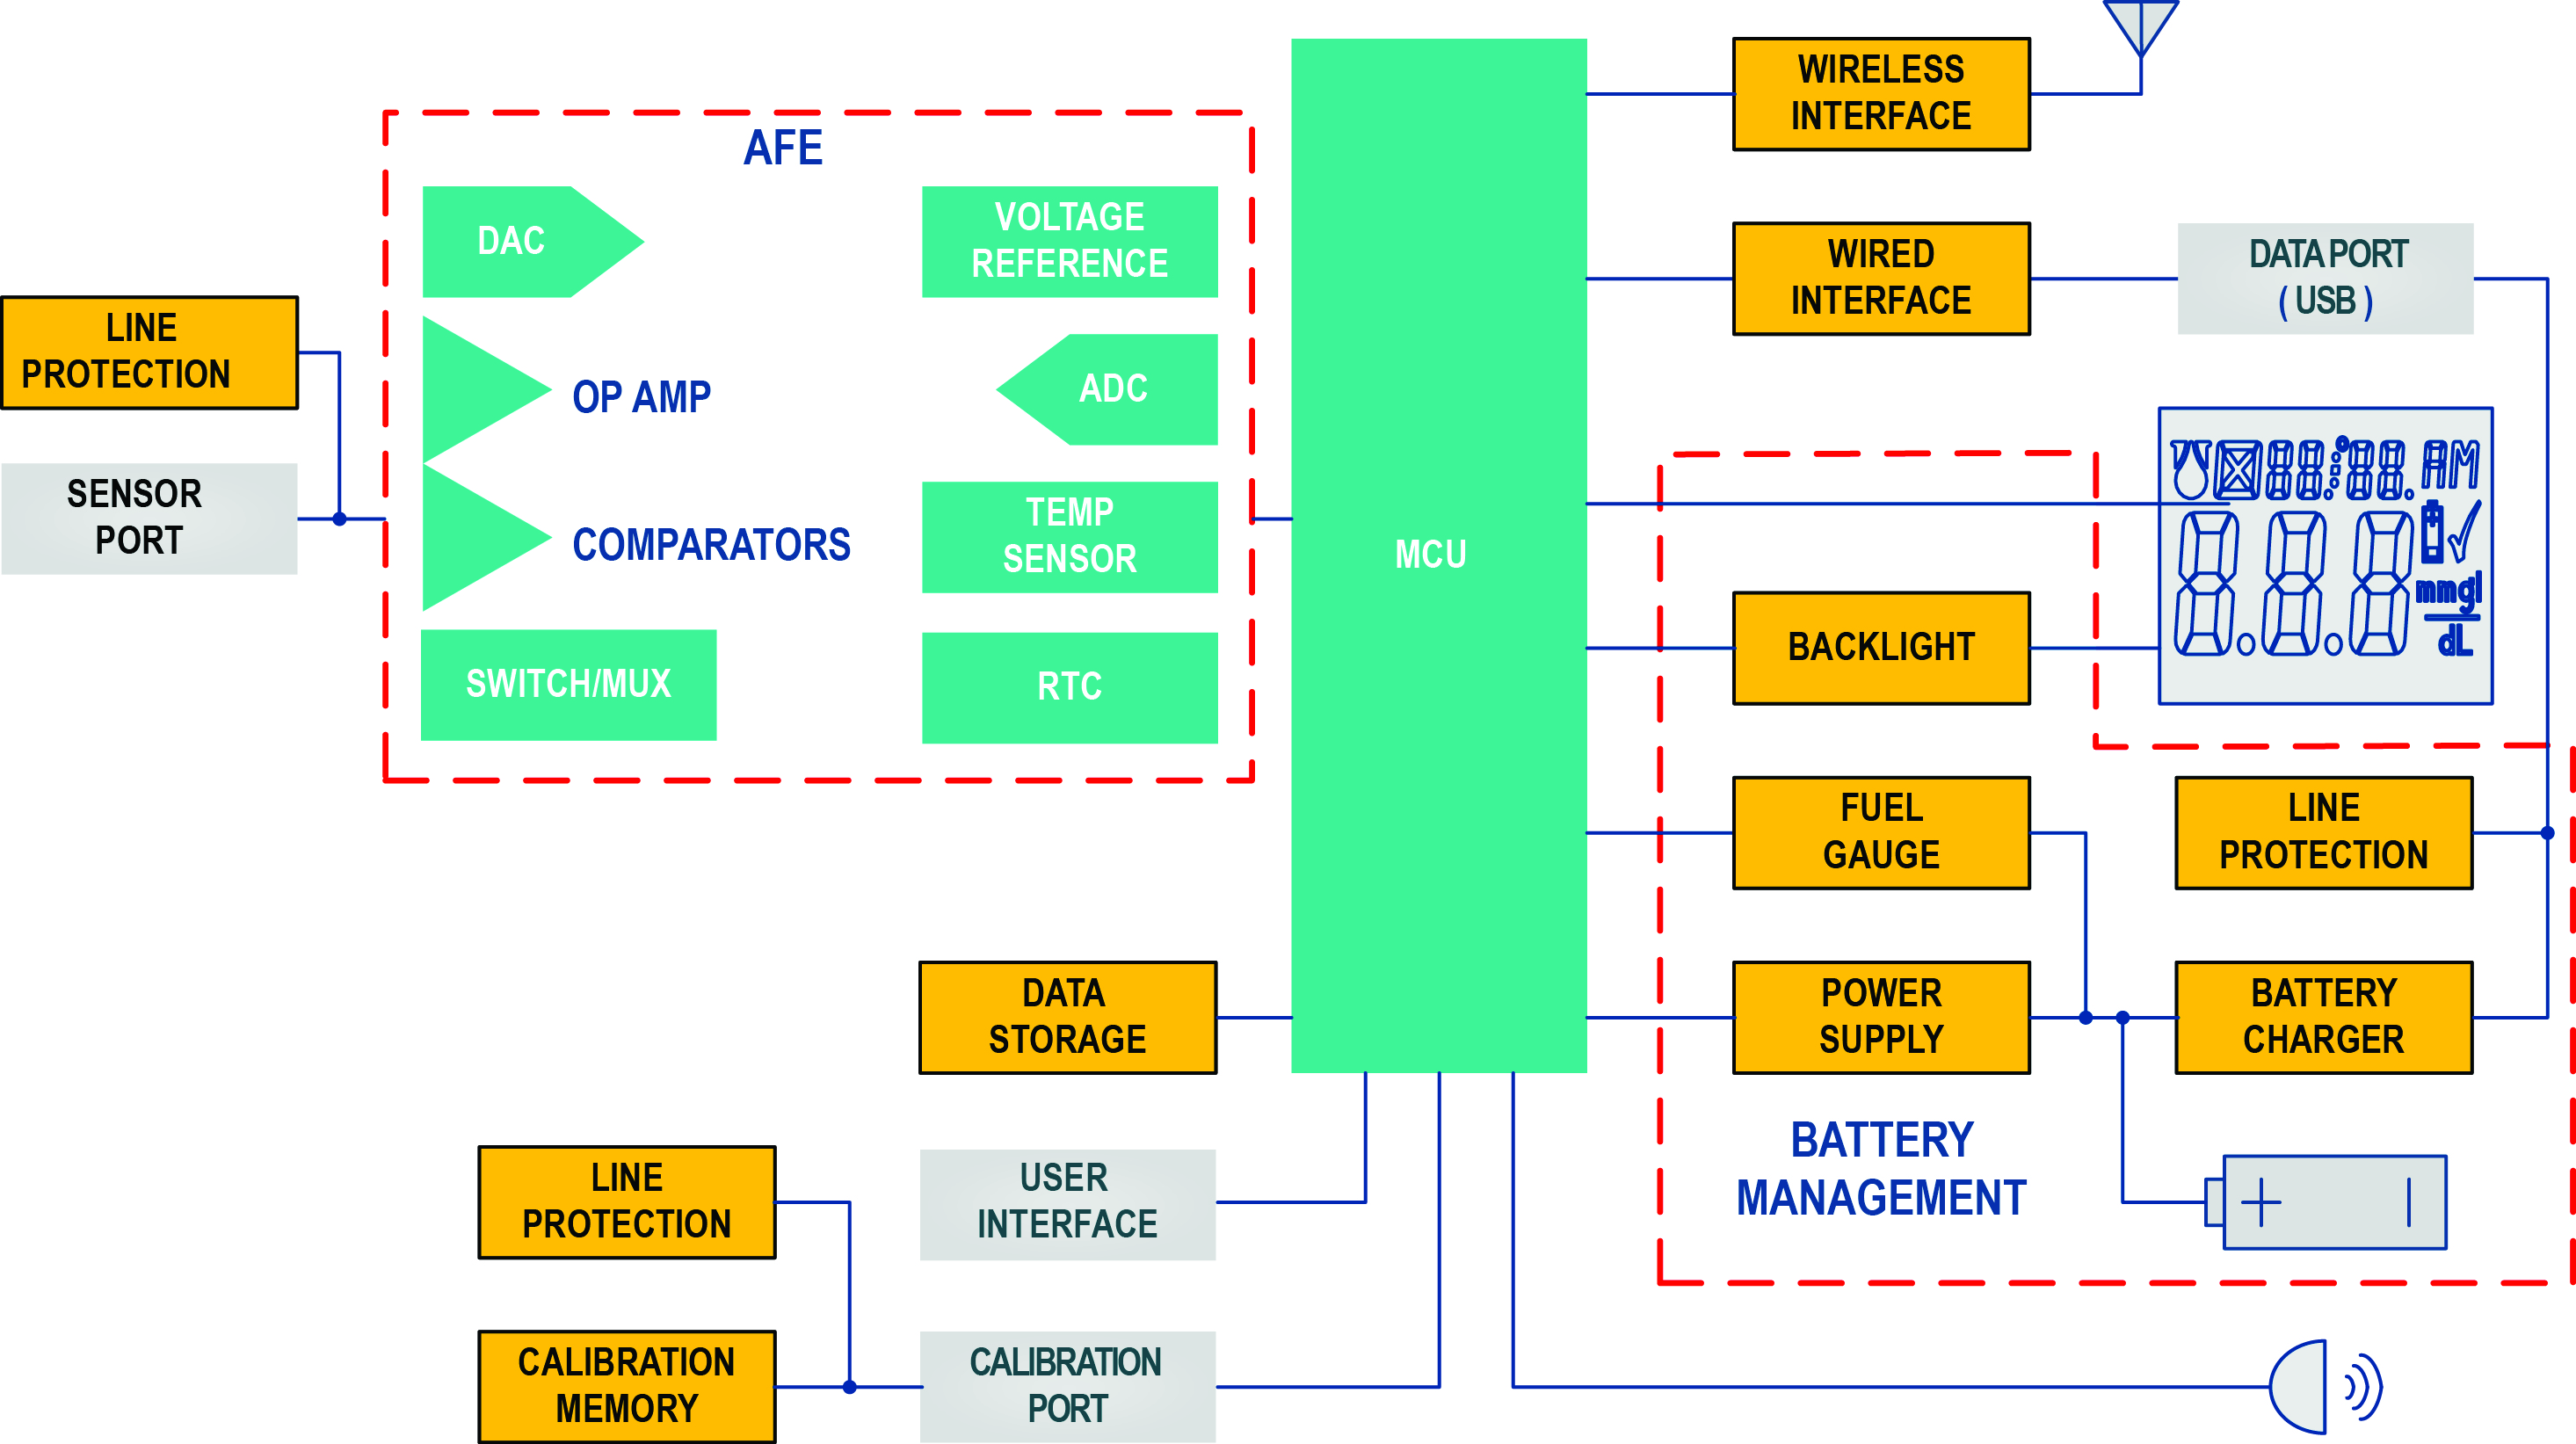 Figure 1 - Block diagram of a basic power solution with multiple discrete components for a portable medical device